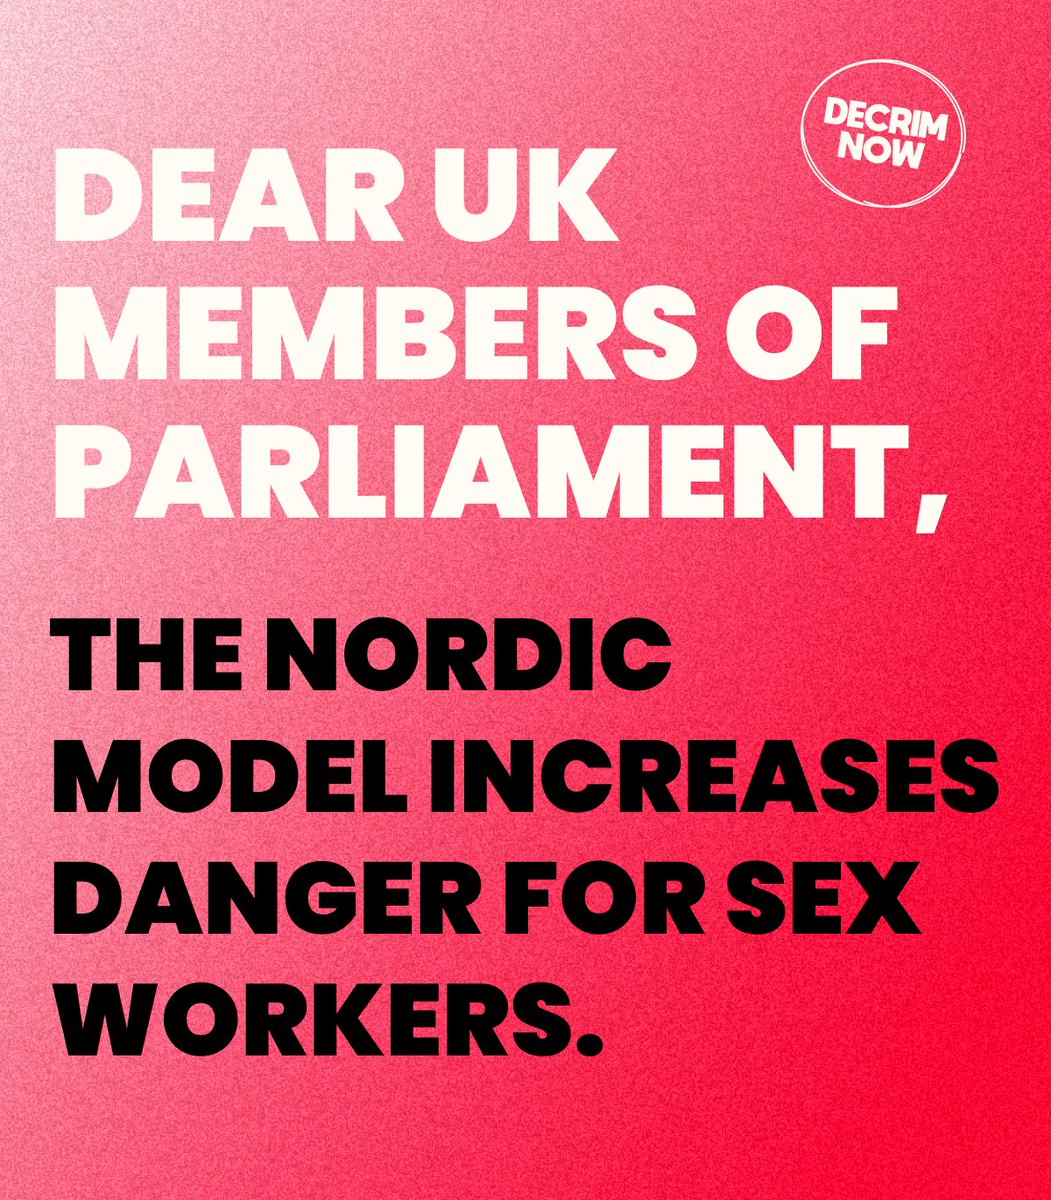  @SistersUncut signed our open letter against the Nordic Model Sisters Uncut are a feminist group taking direct action for domestic + sexual violence services since 2014. Read the letter here  https://decrimnow.org.uk/open-letter-on-the-nordic-model/  #notonordicmodel